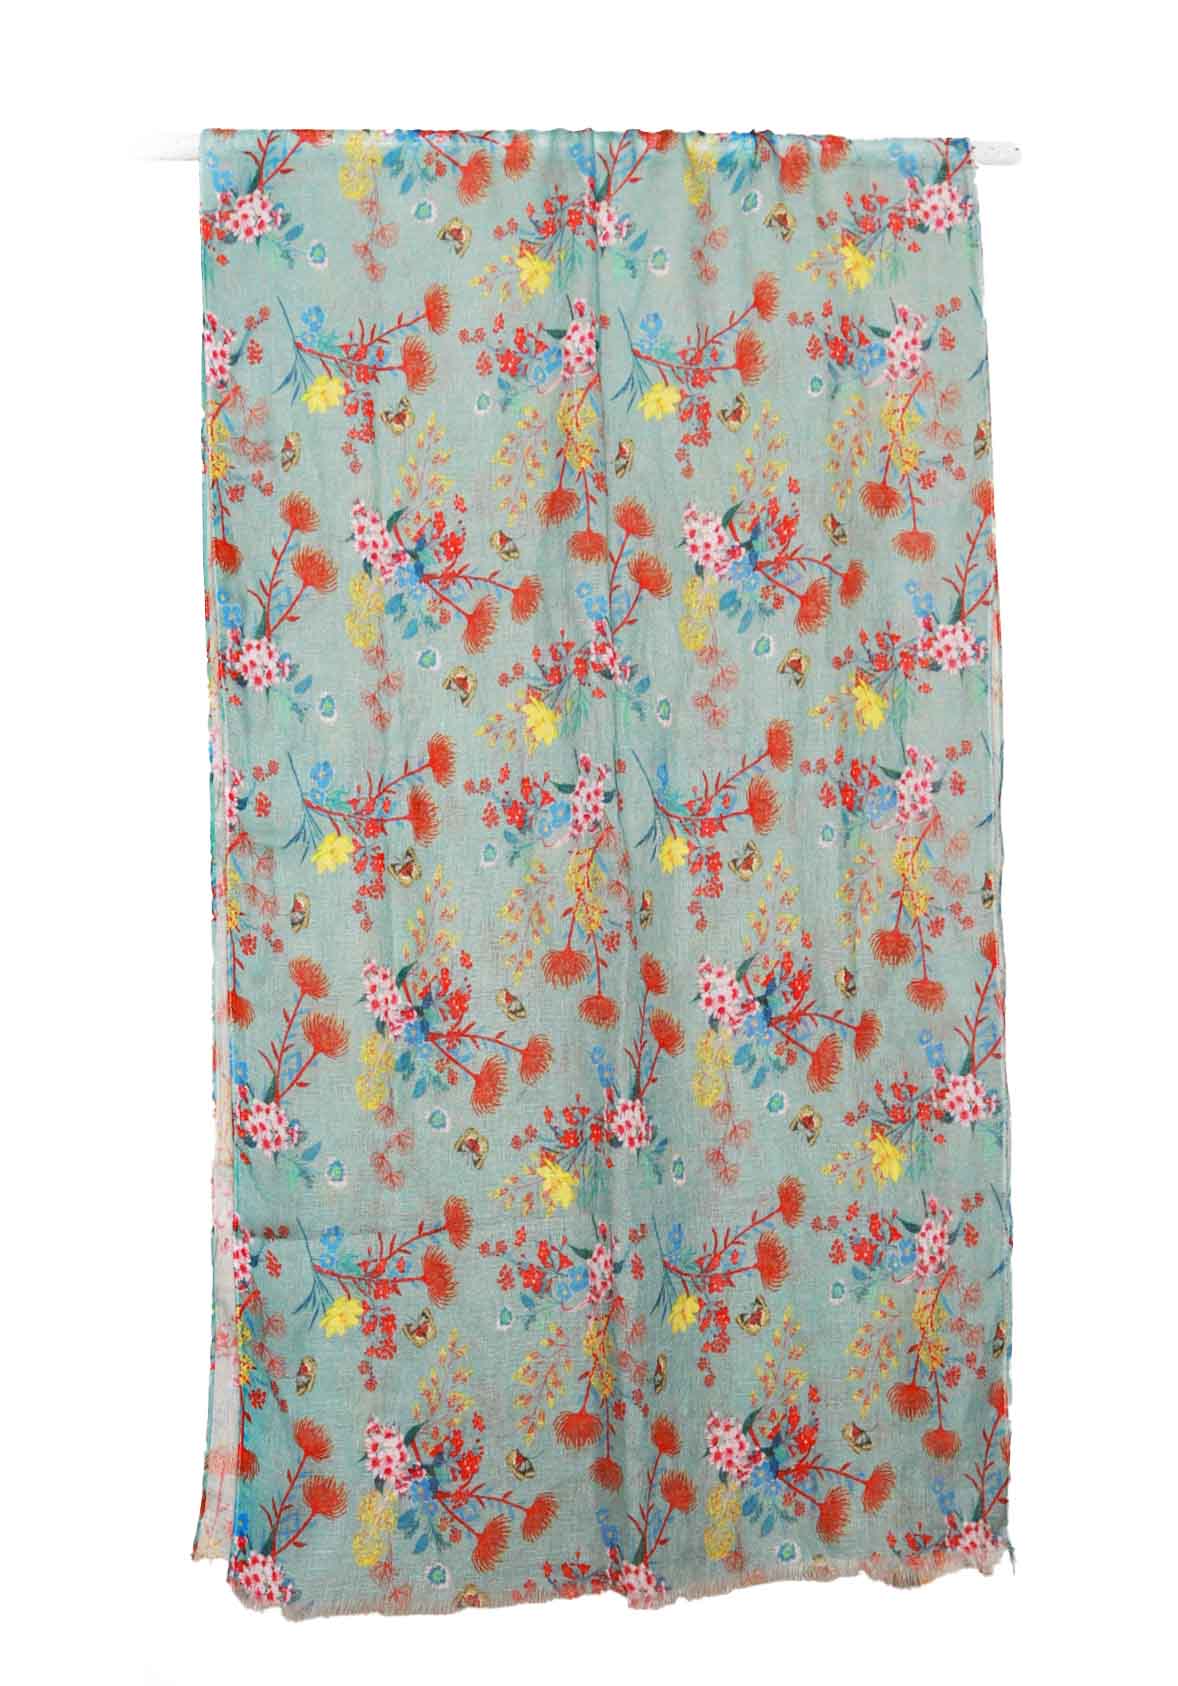 Indulge in luxury with our floral scarves. Soft, vibrant, and irresistibly stylish. Transform your ensemble instantly!